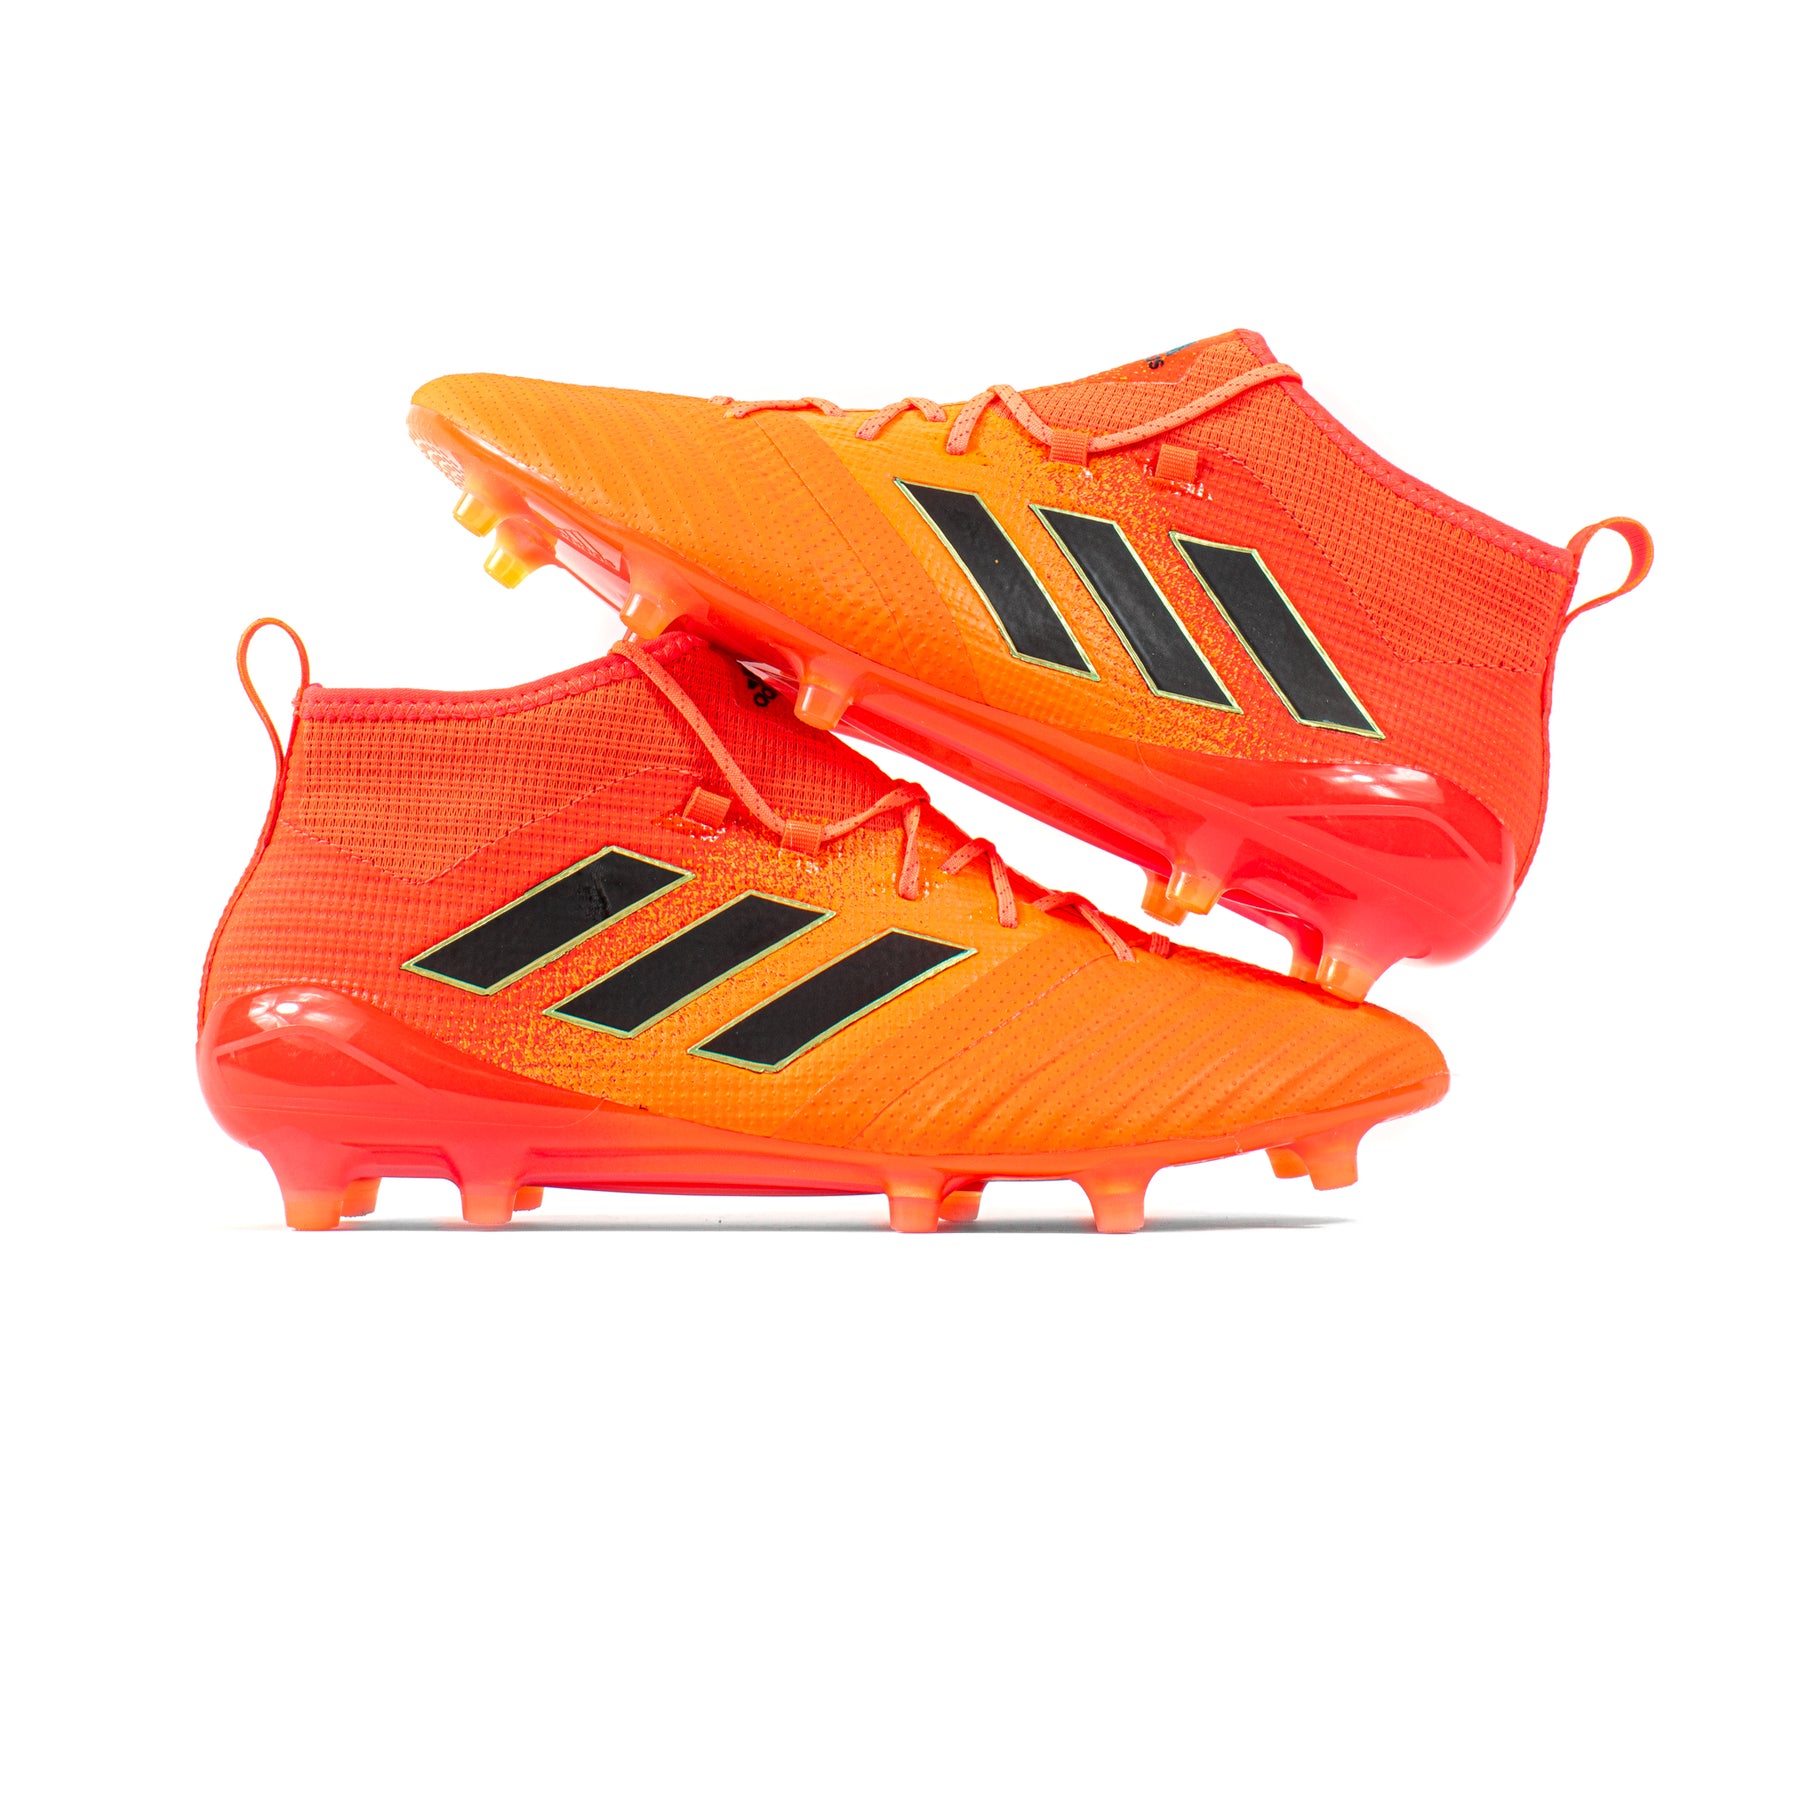 Adidas Ace 17.1 FG Classic Soccer Cleats